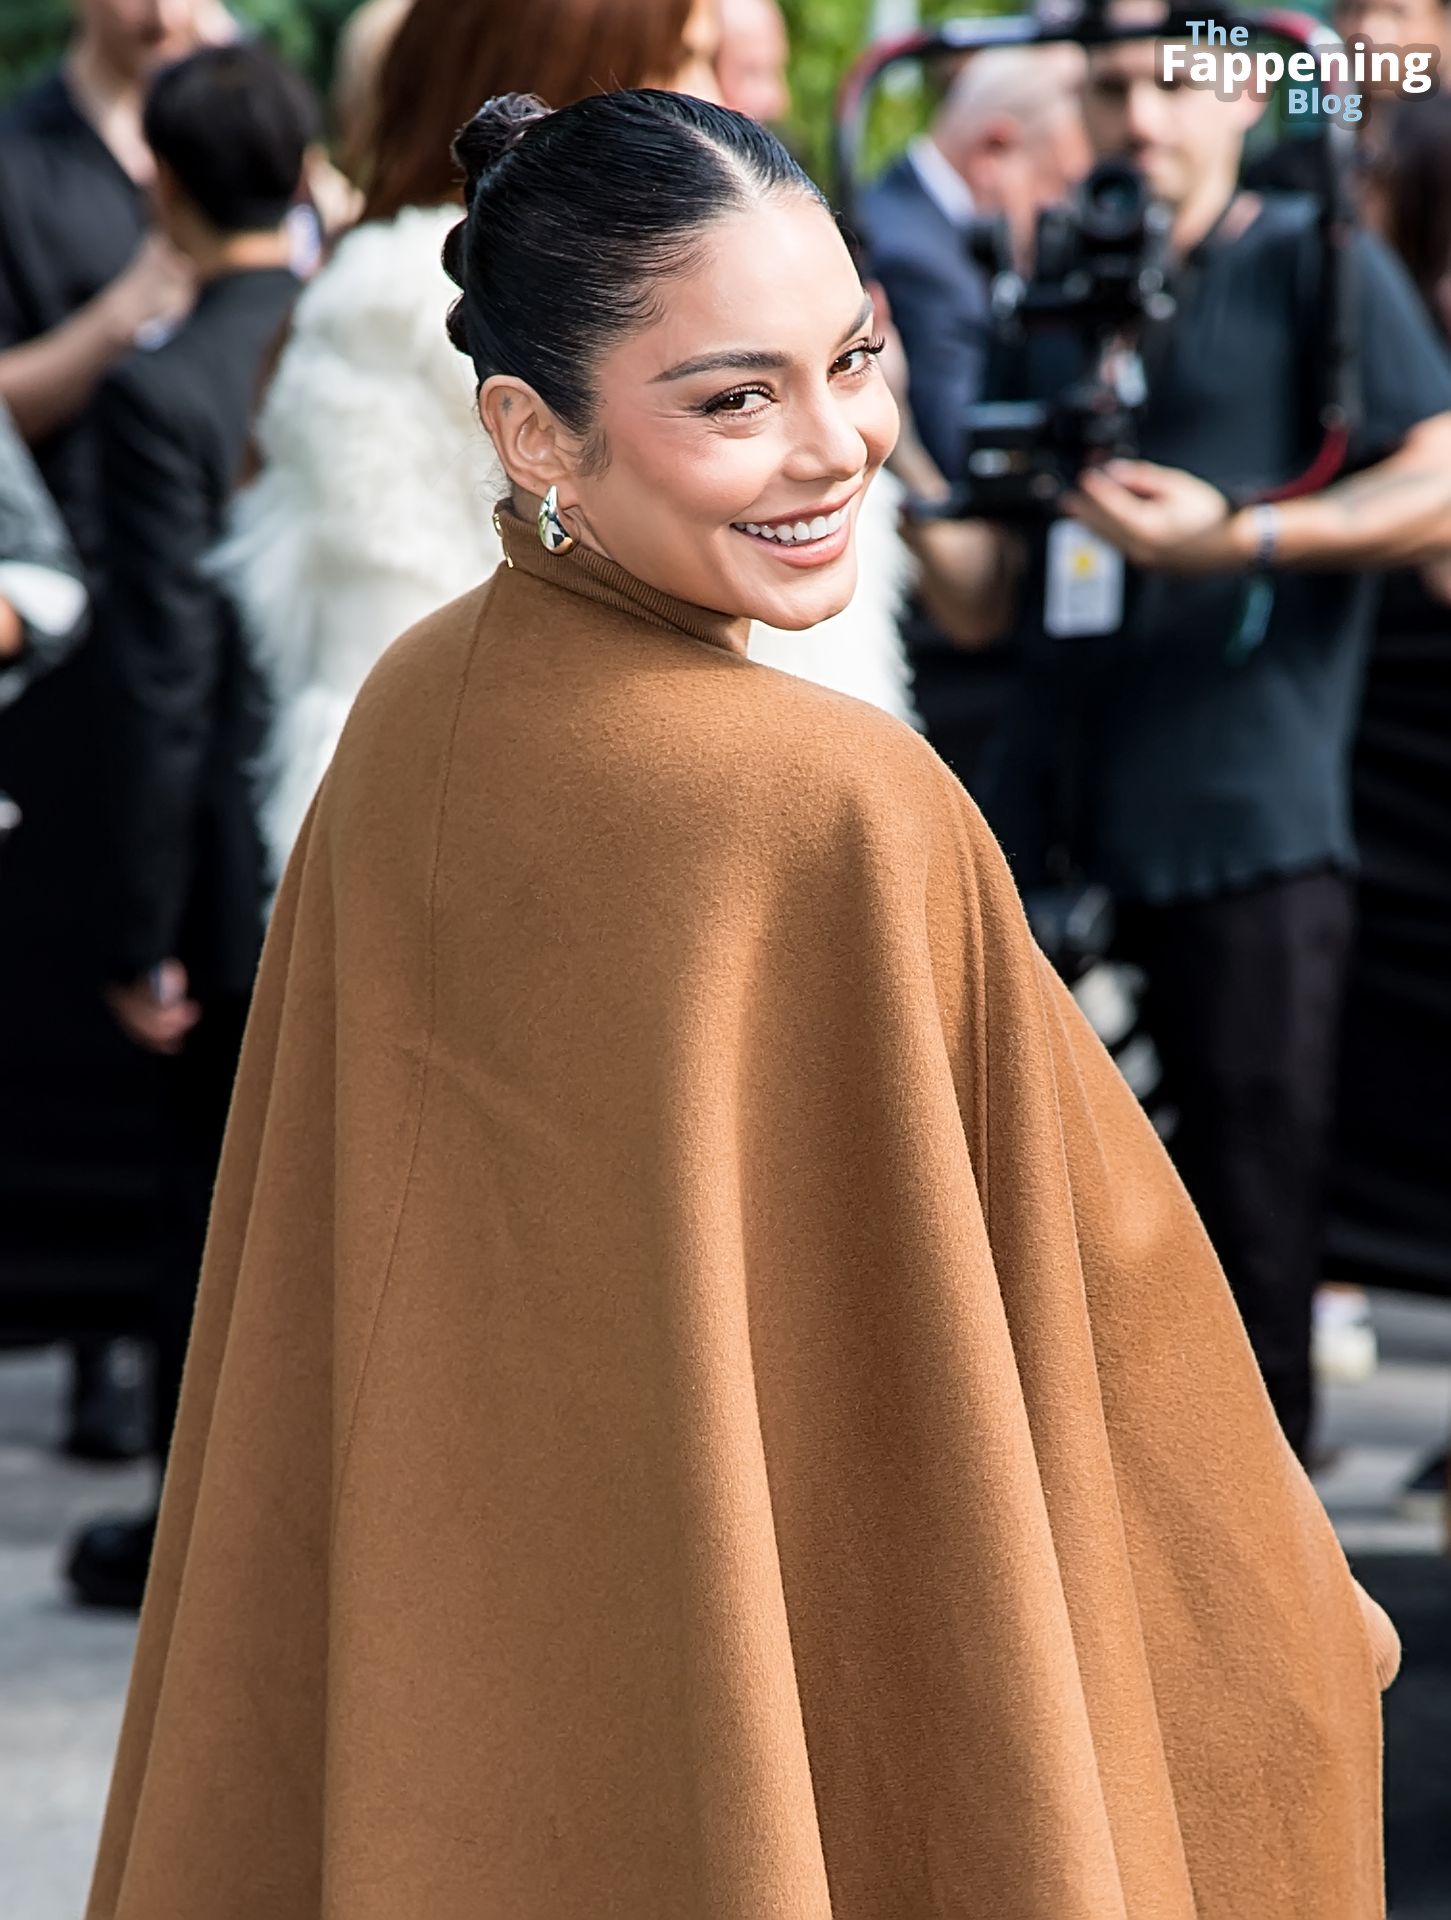 Vanessa Hudgens Displays Her Pokies as She Attends the Michael Kors Show in Brooklyn (94 Photos)